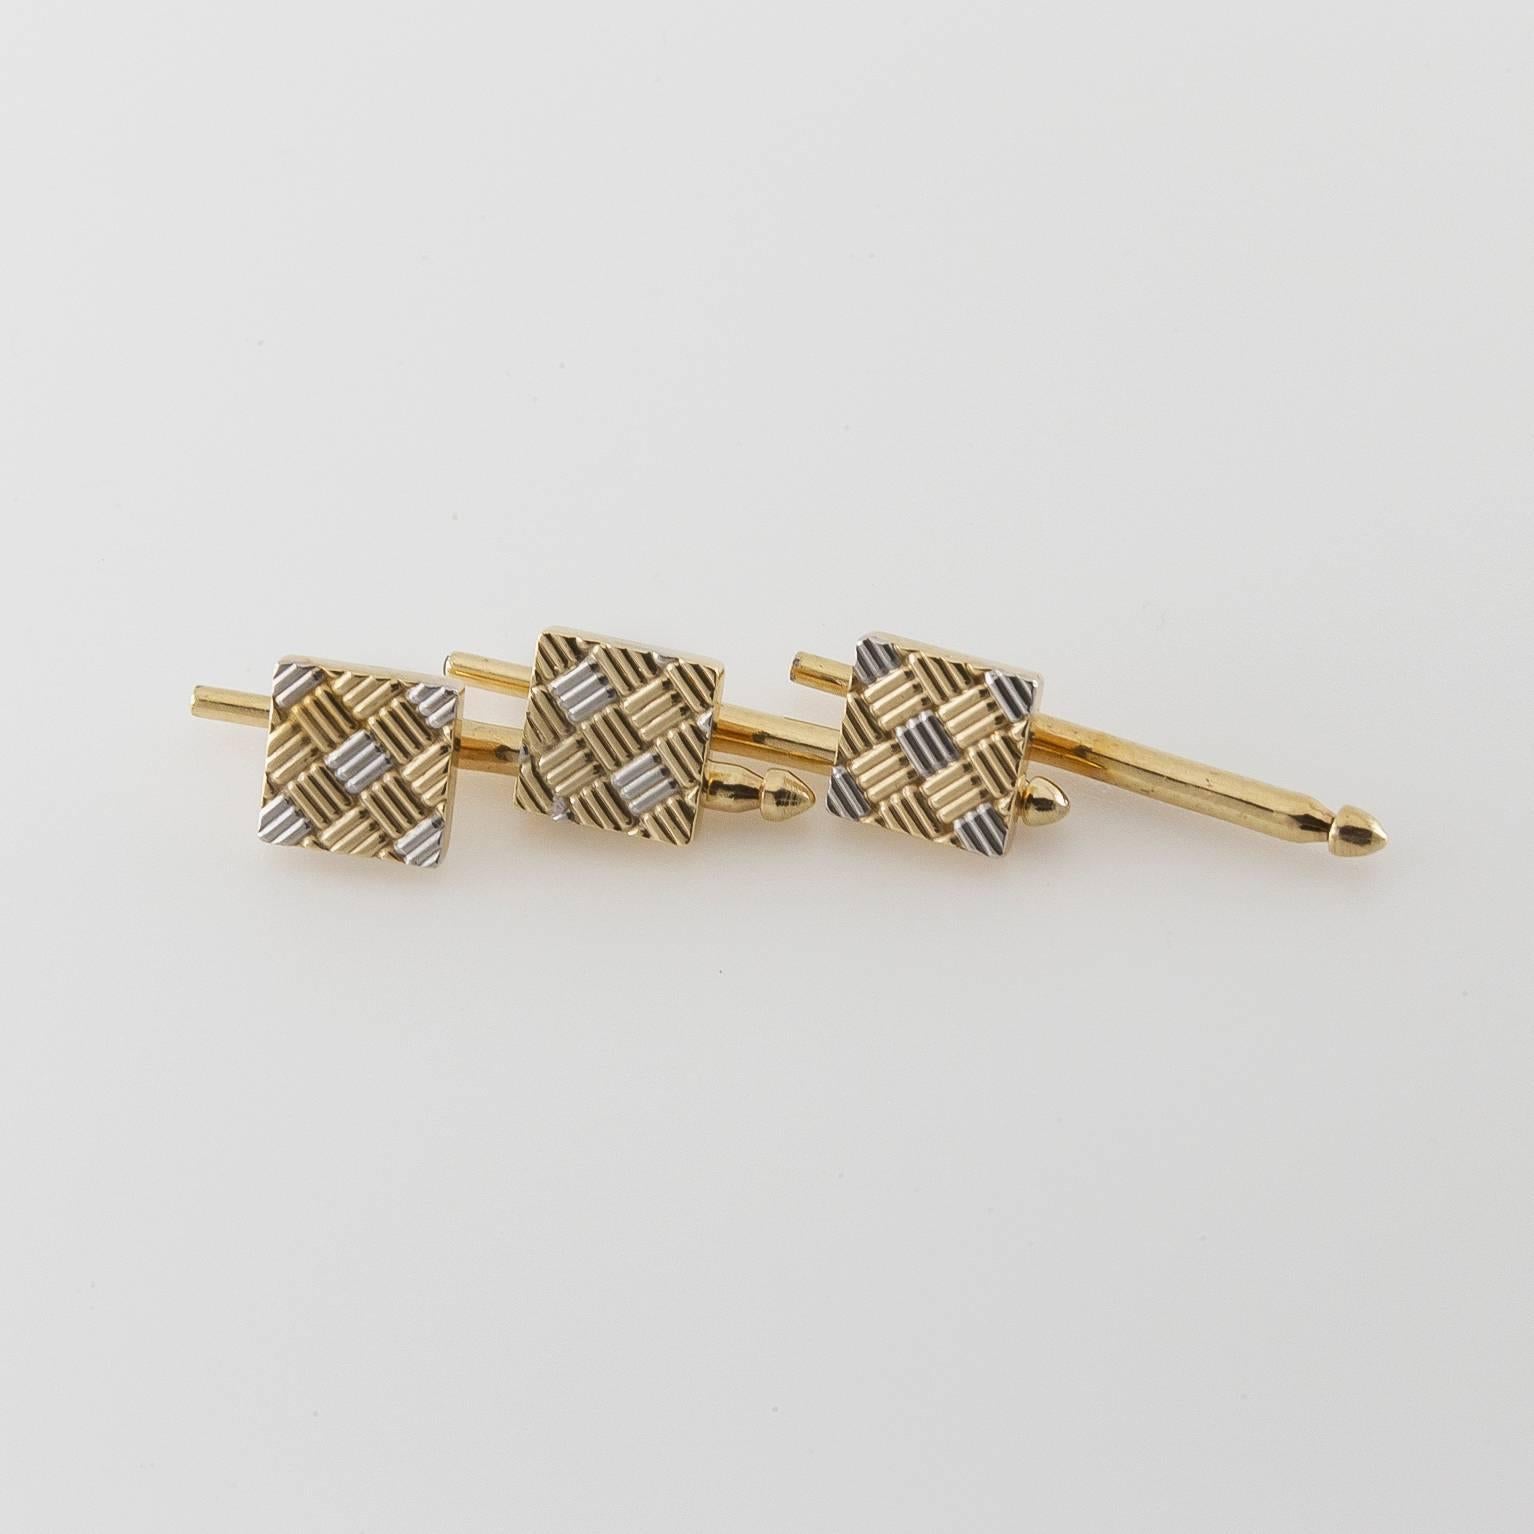 Men's Tuxedo Cufflinks Set in Gold and Platinum with Classic Woven Checkered Pattern